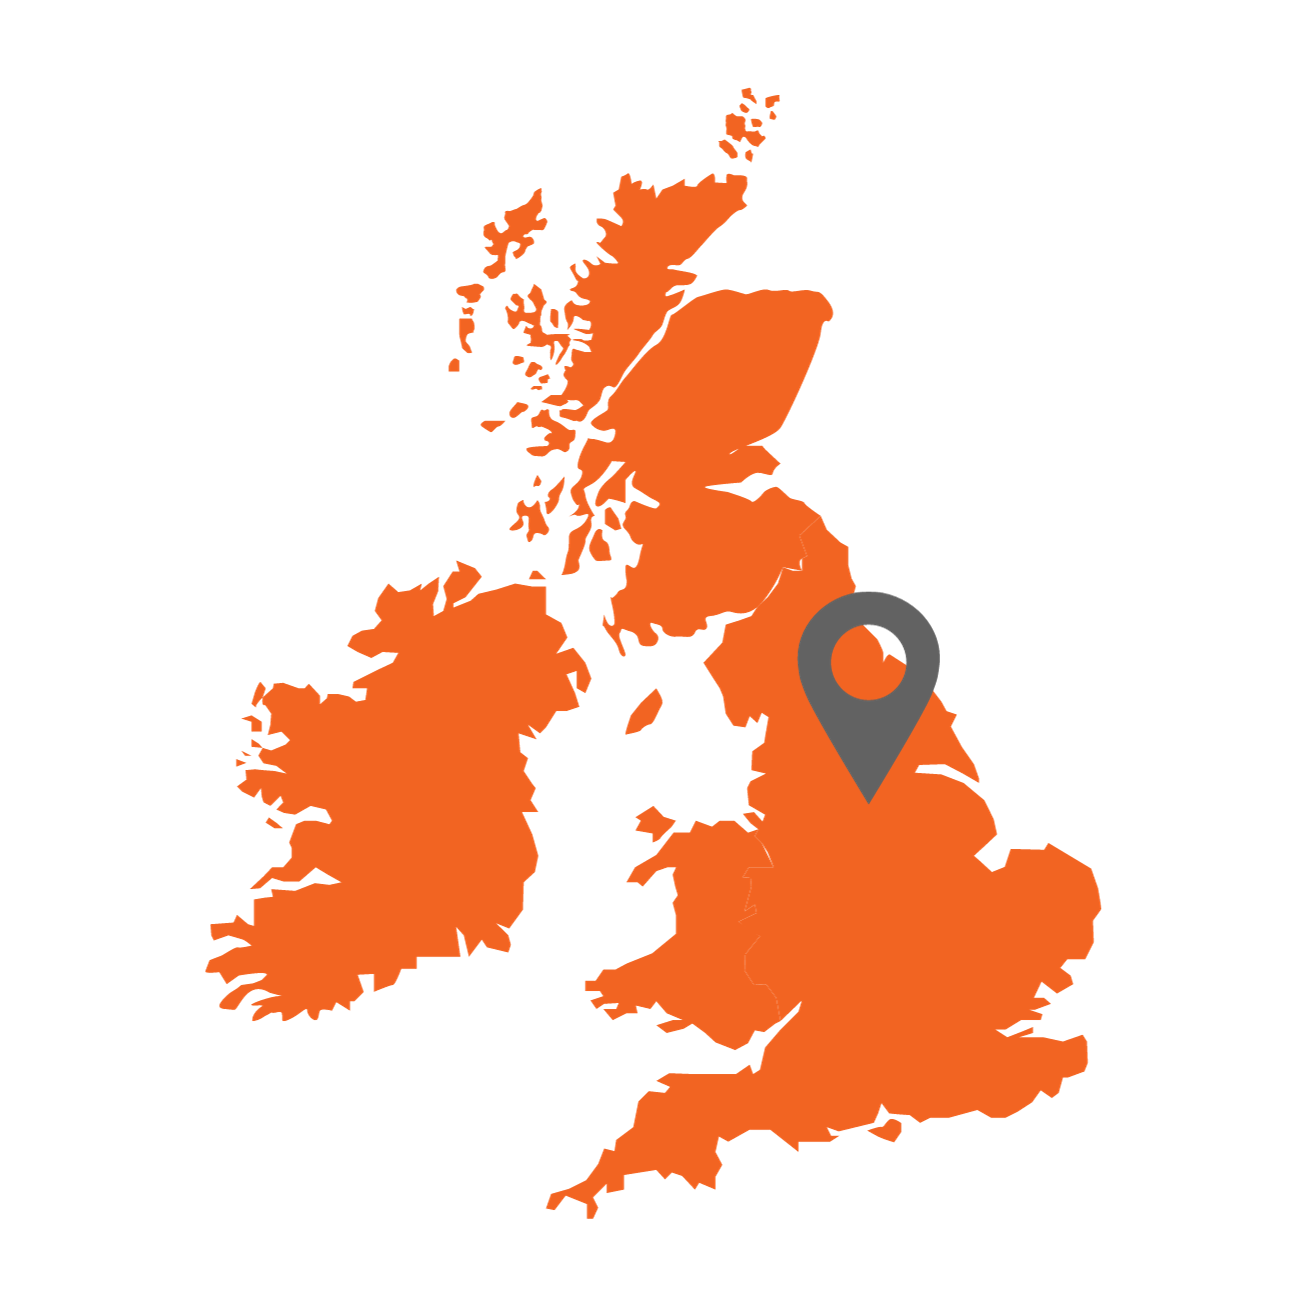 Orange map of the British Isles with a grey location marker pointing at South Yorkshire